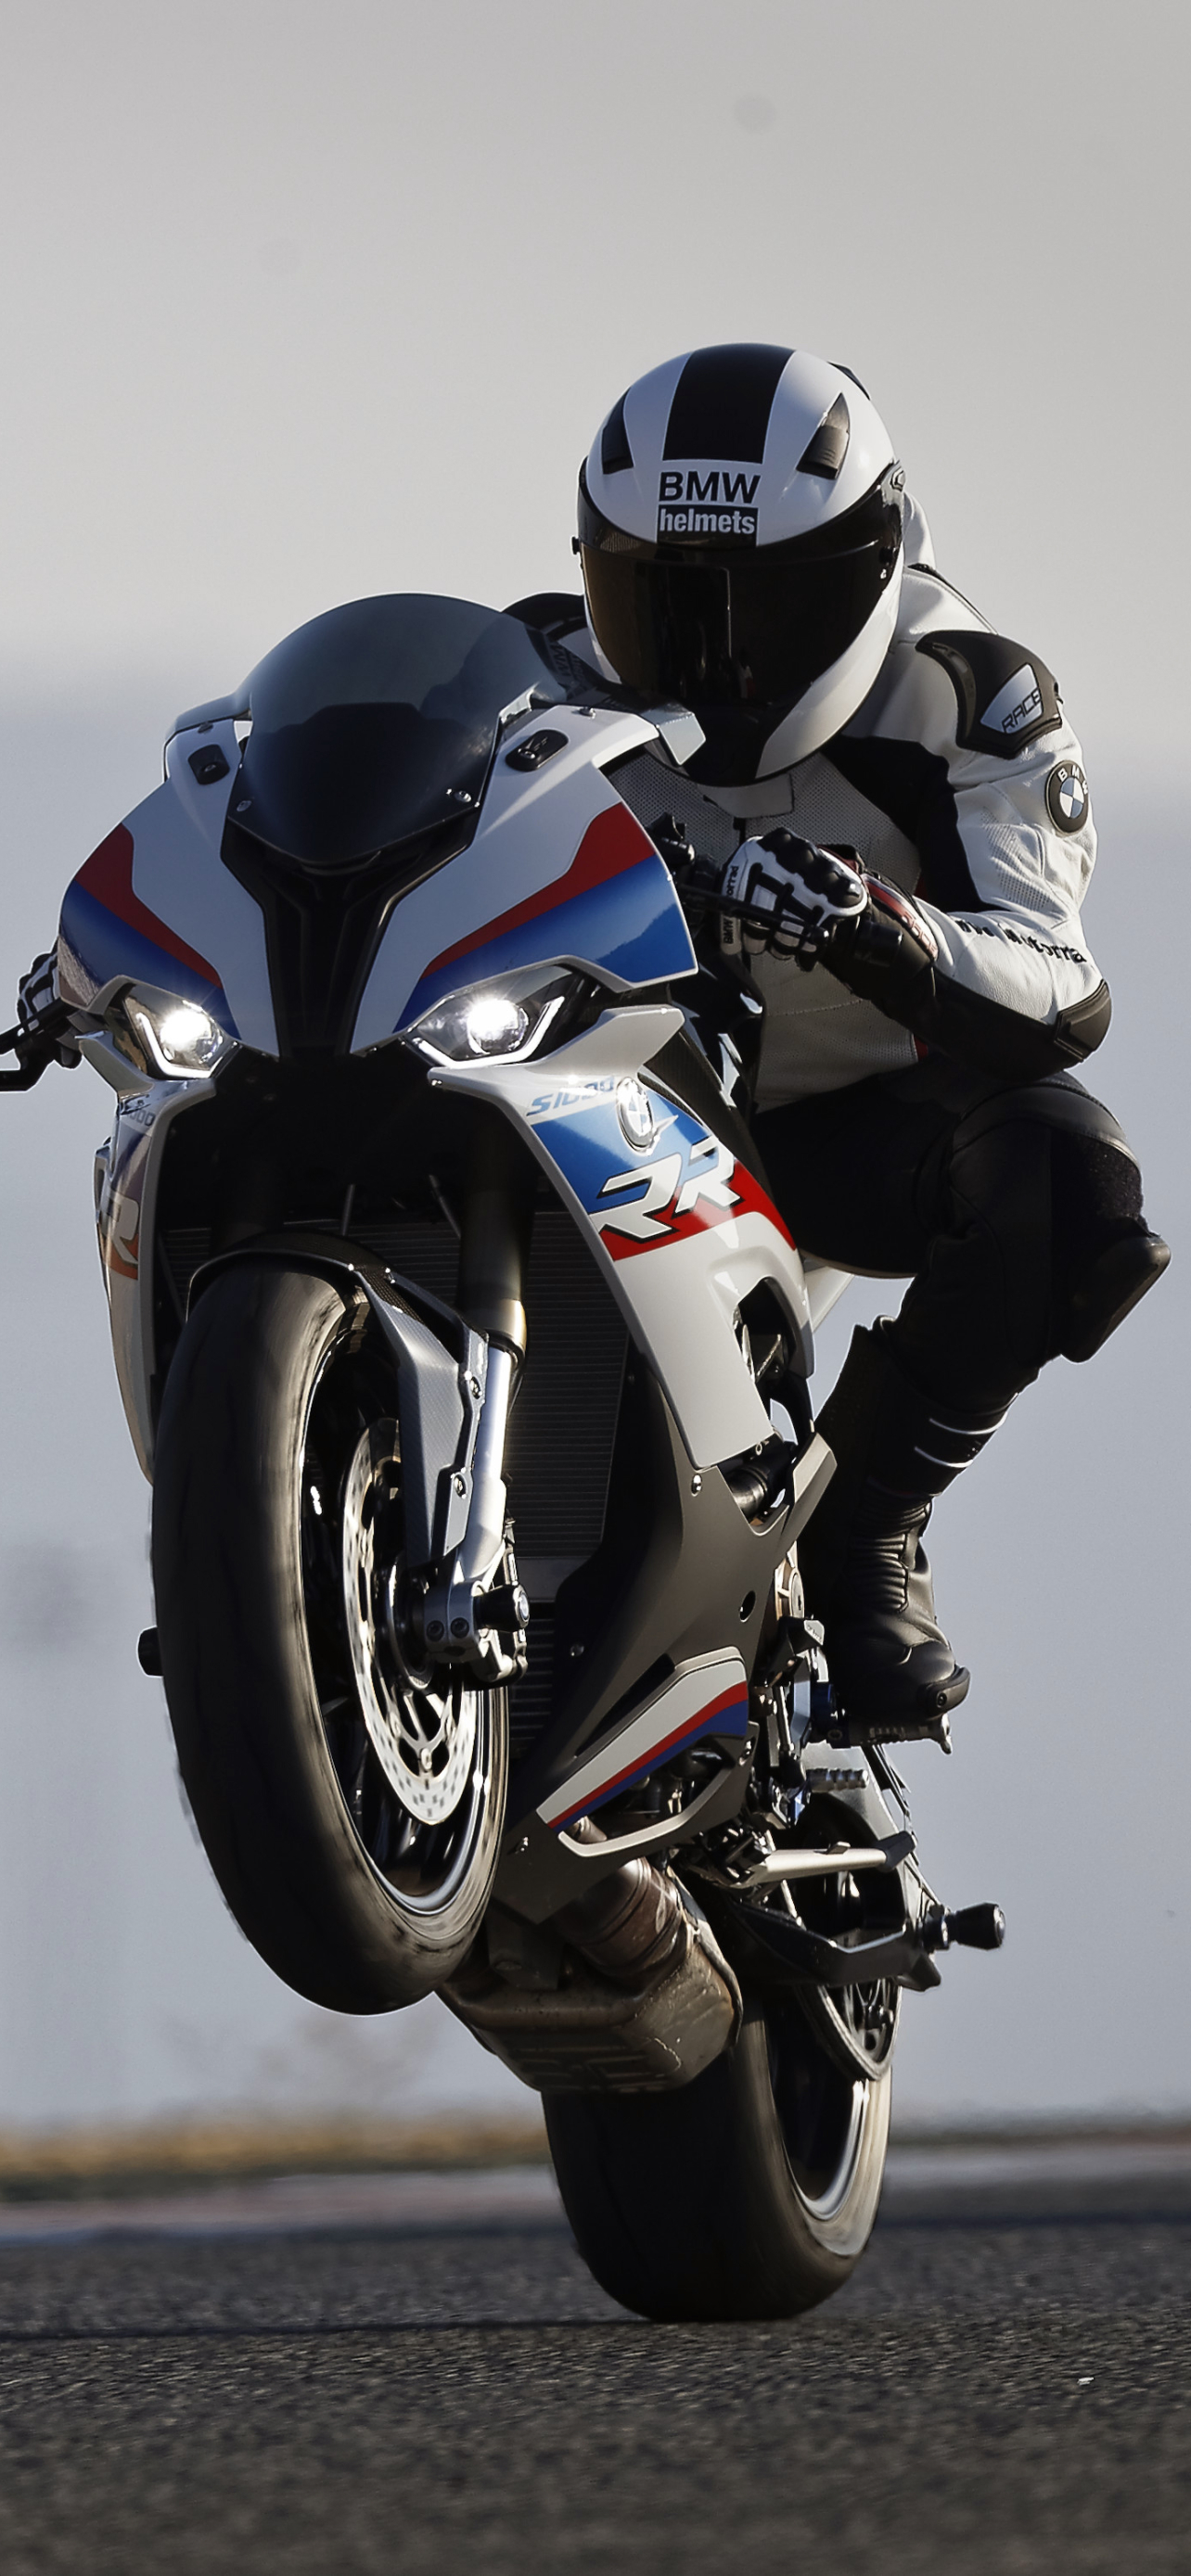 bmw s1000rr, bmw s1000, motorcycles, vehicles, motorcycle Full HD